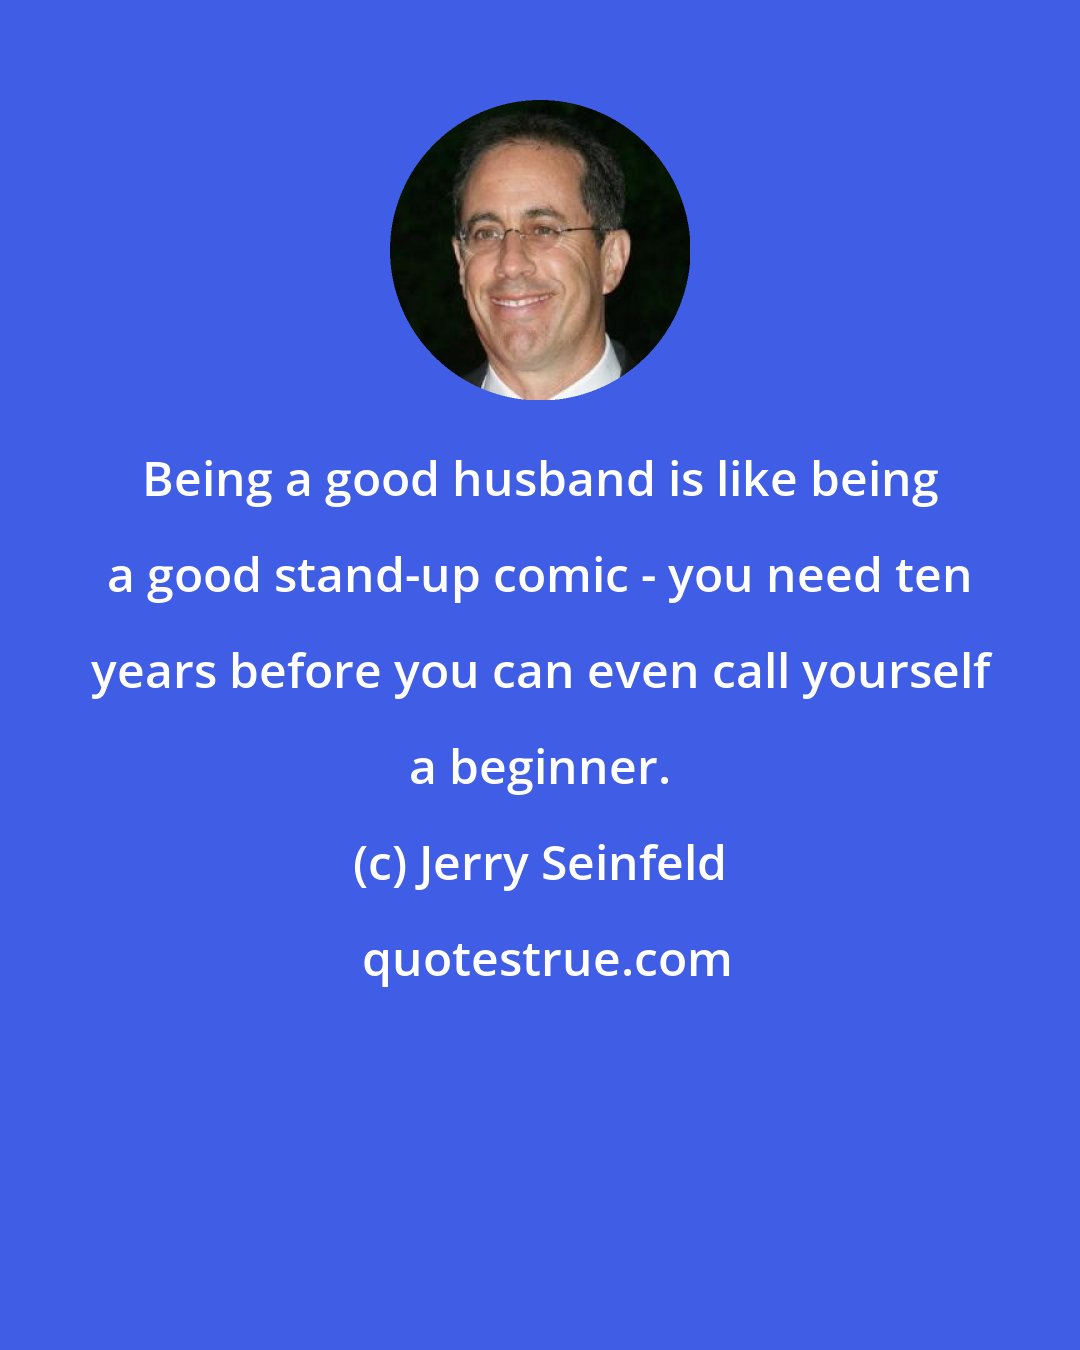 Jerry Seinfeld: Being a good husband is like being a good stand-up comic - you need ten years before you can even call yourself a beginner.